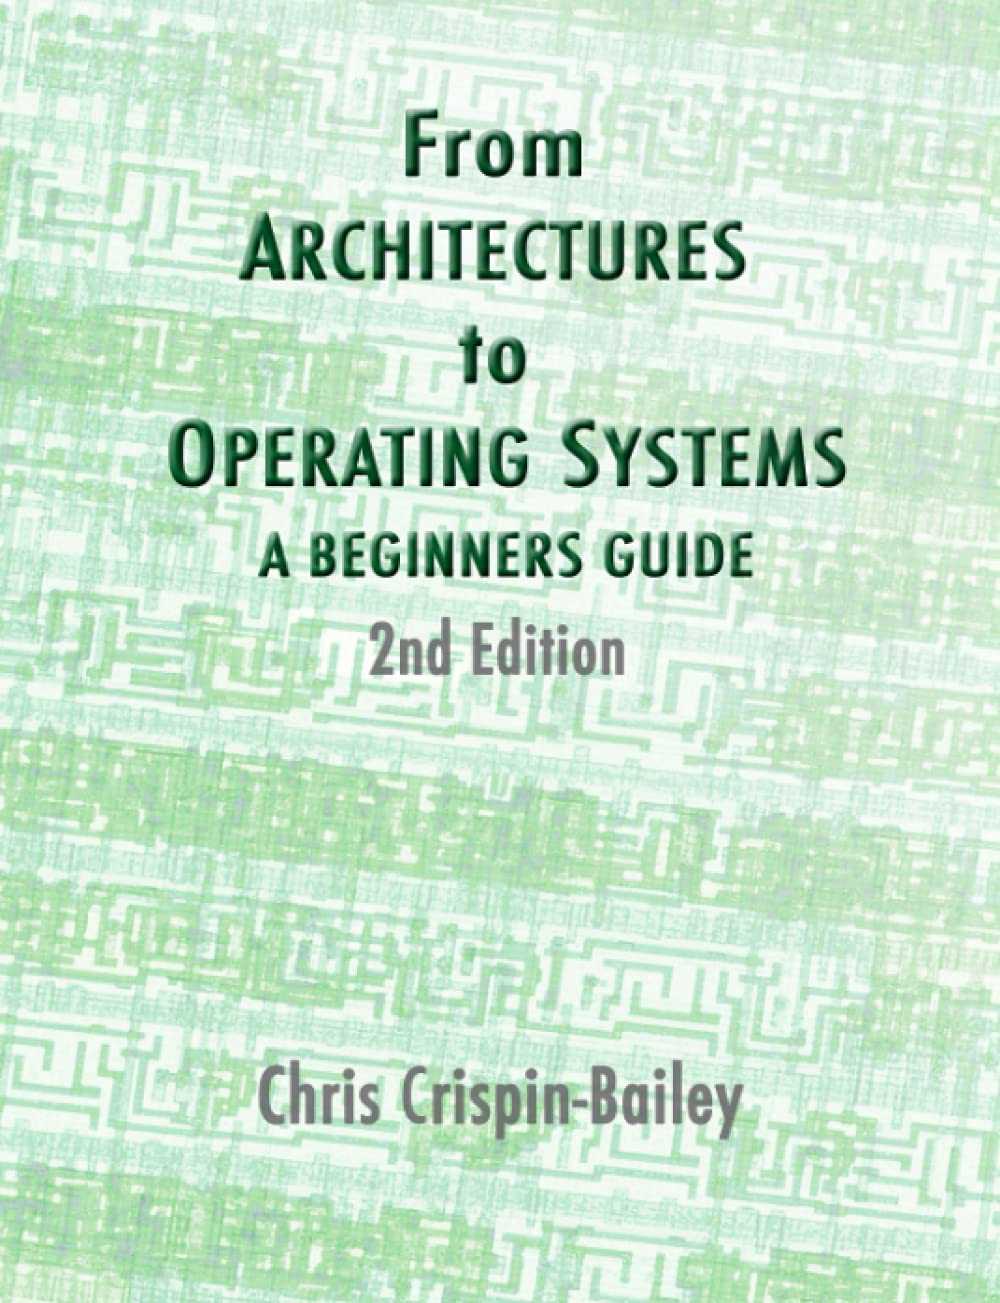 From Architectures to Operating Systems